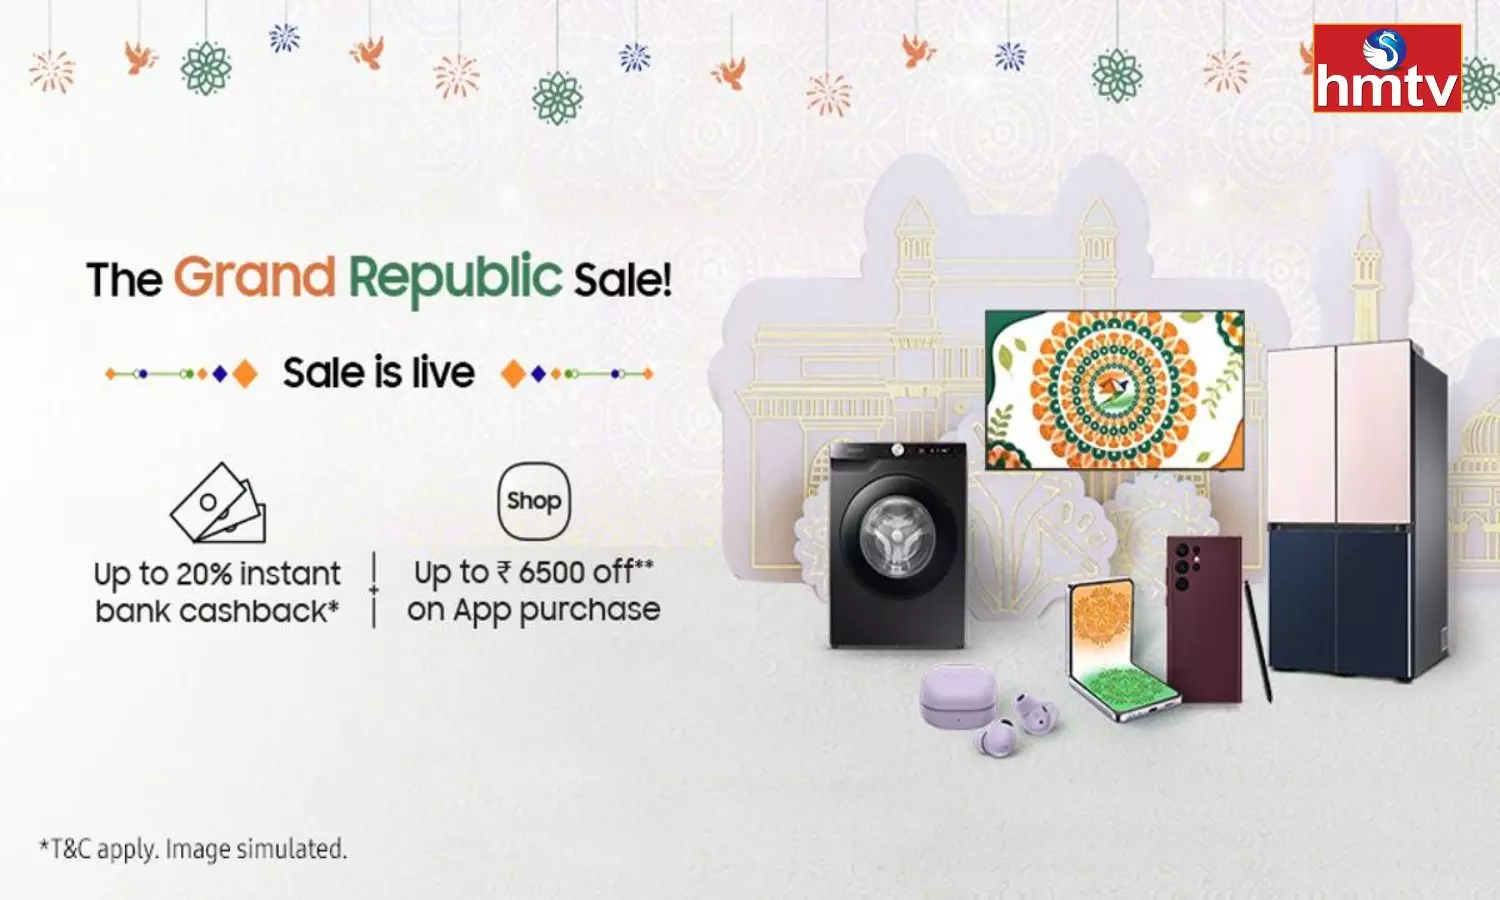 Samsung Grand Republic Sale Huge Discounts on Smartphones and Home Appliances